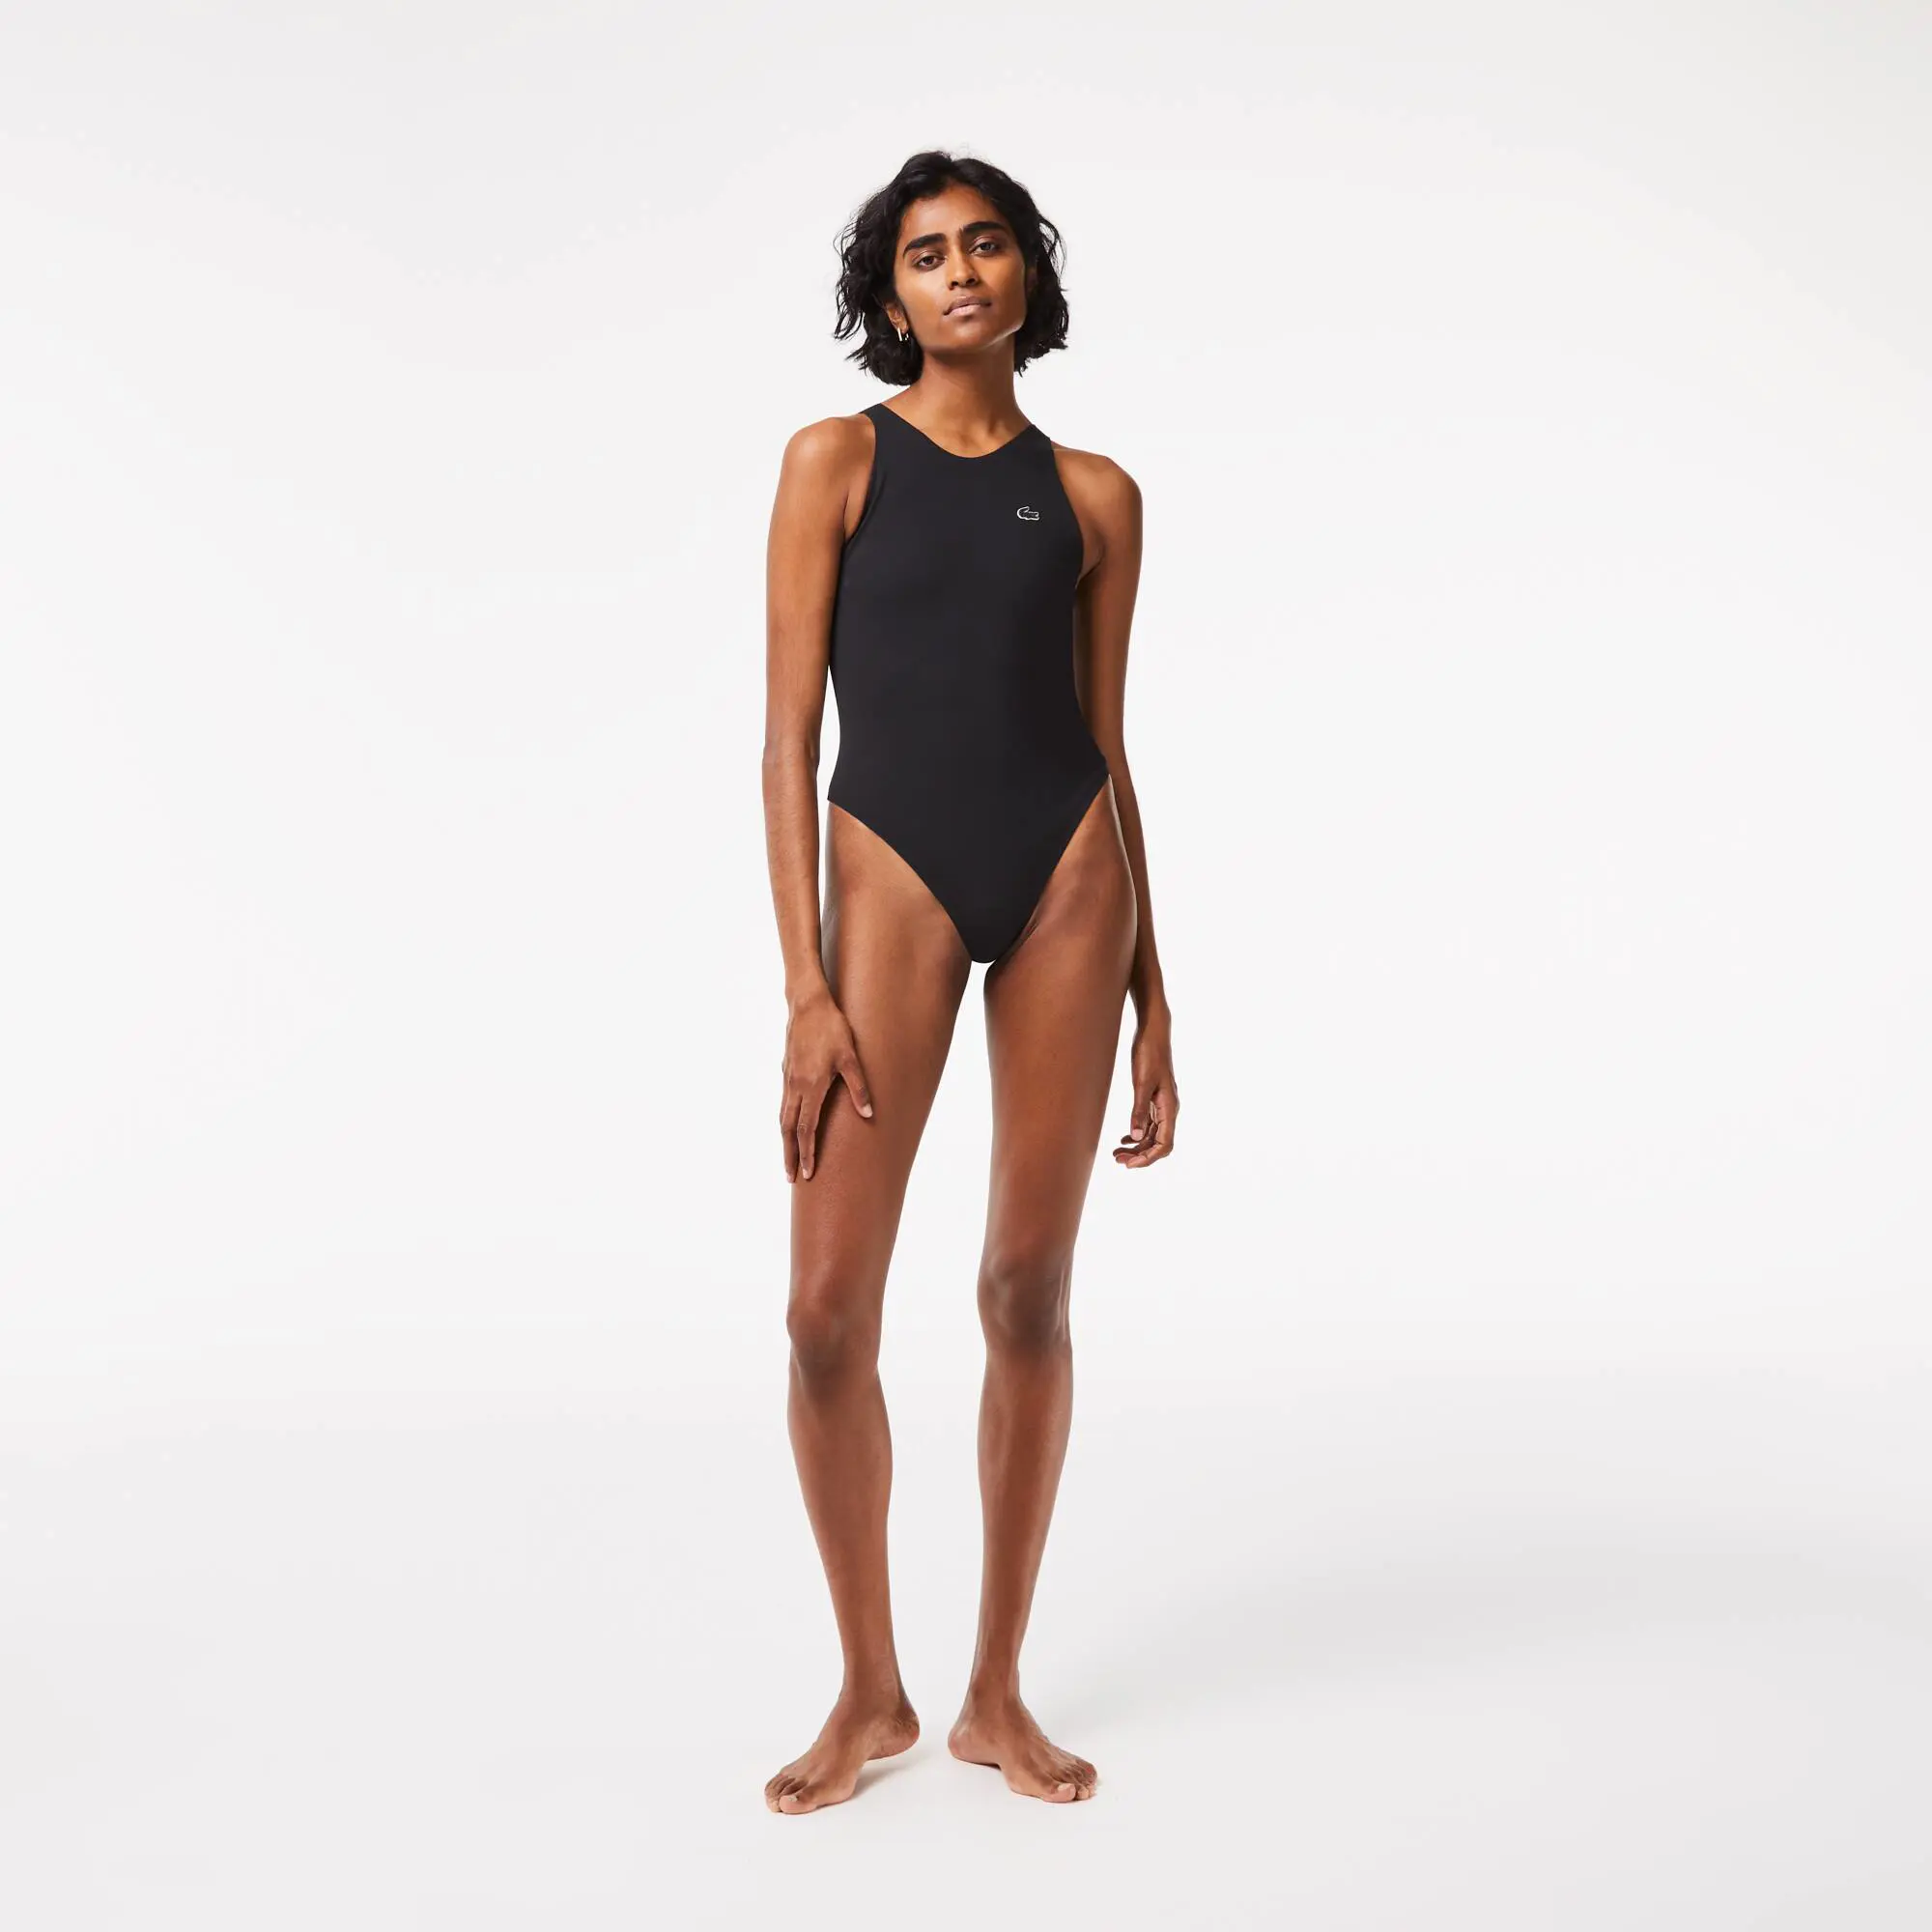 Lacoste Women’s One-Piece Recycled Polyamide Swimsuit. 1